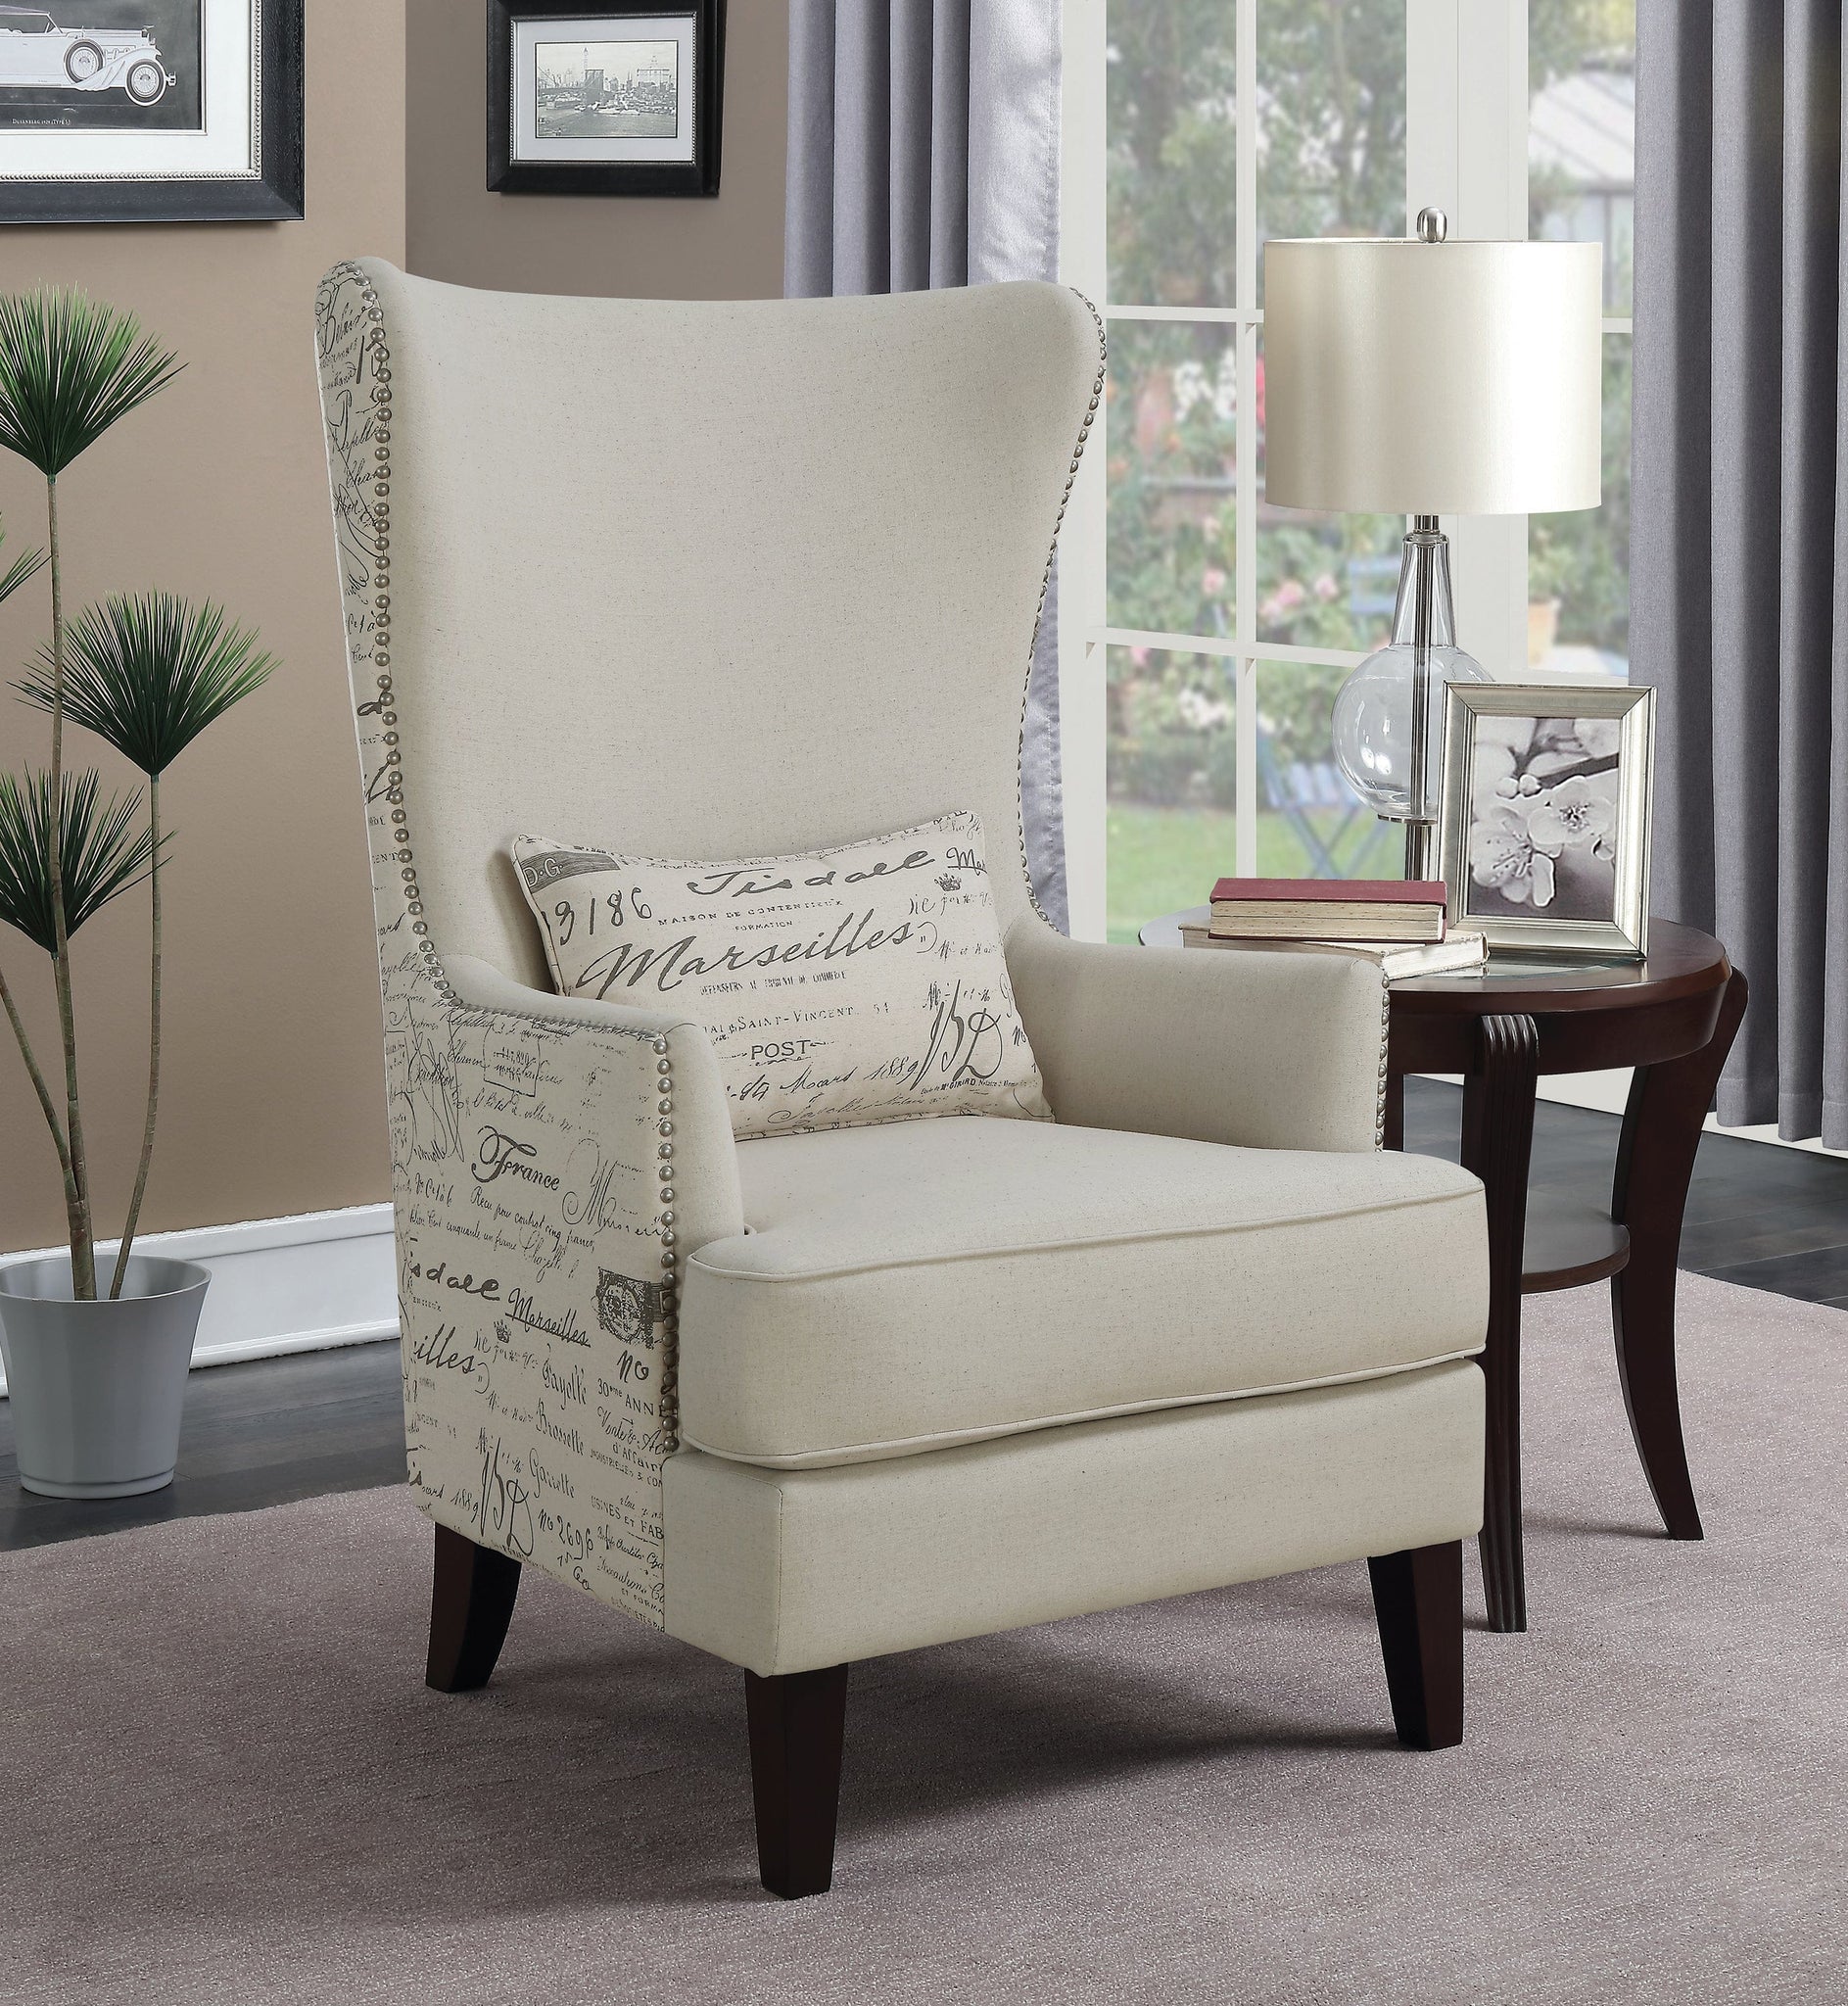 Curved Arm High Back Accent Chair Cream - 904047